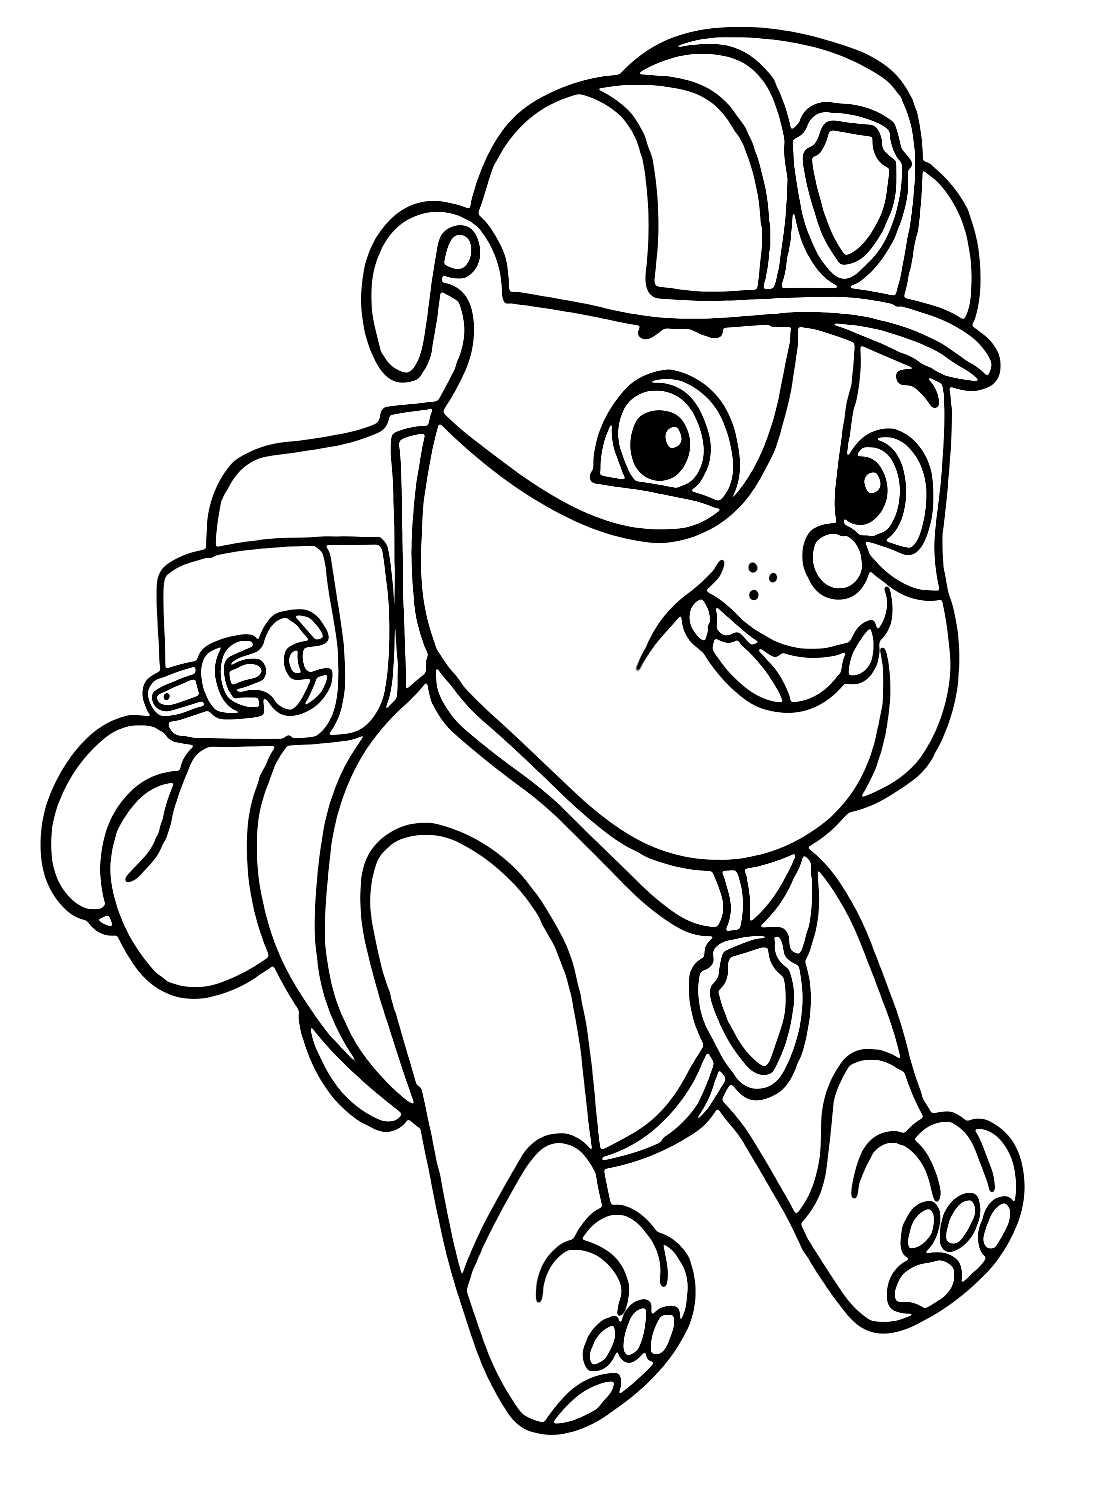 Happy Rubble Paw Patrol Coloring Pages